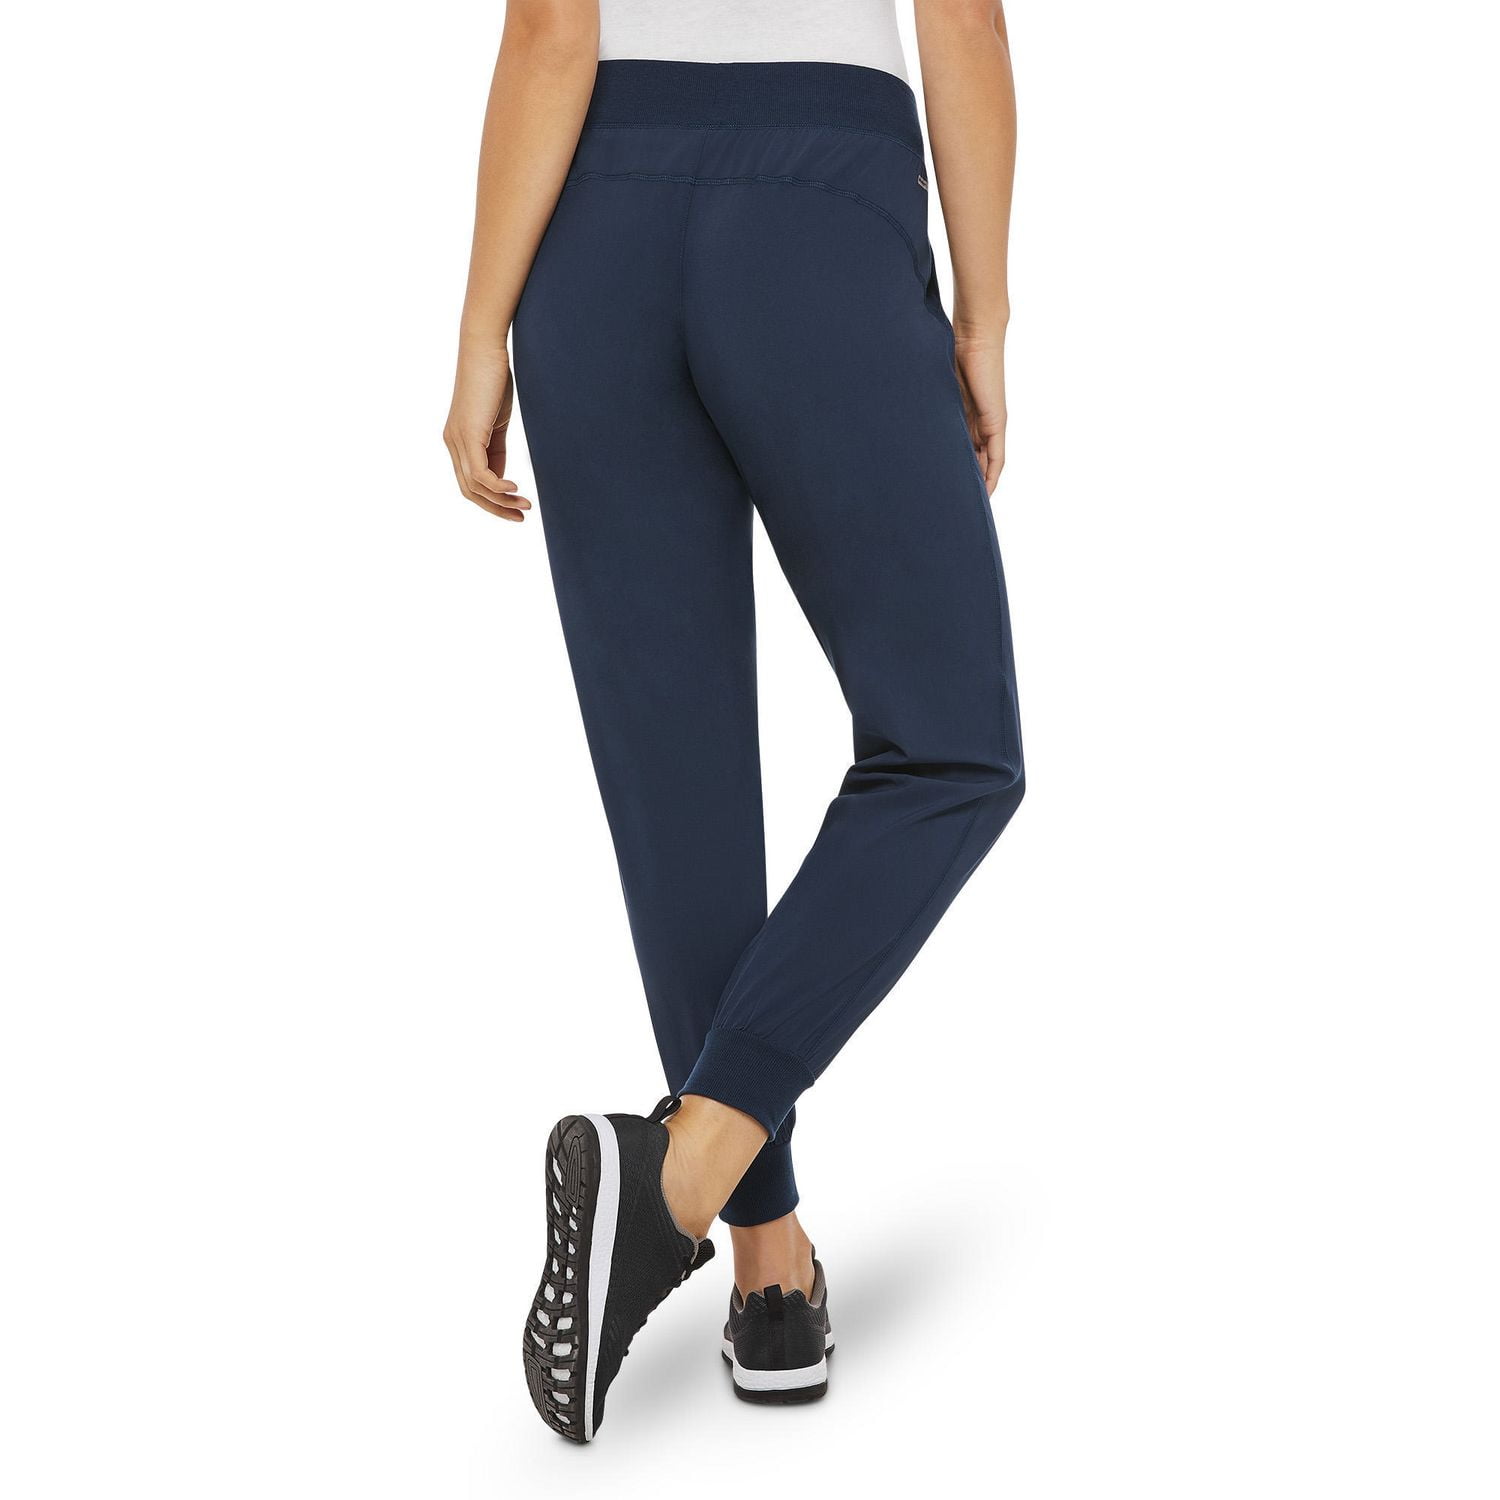 LL8837 Laddies Sport Lower/Jogger for Gyms or Casual Wear